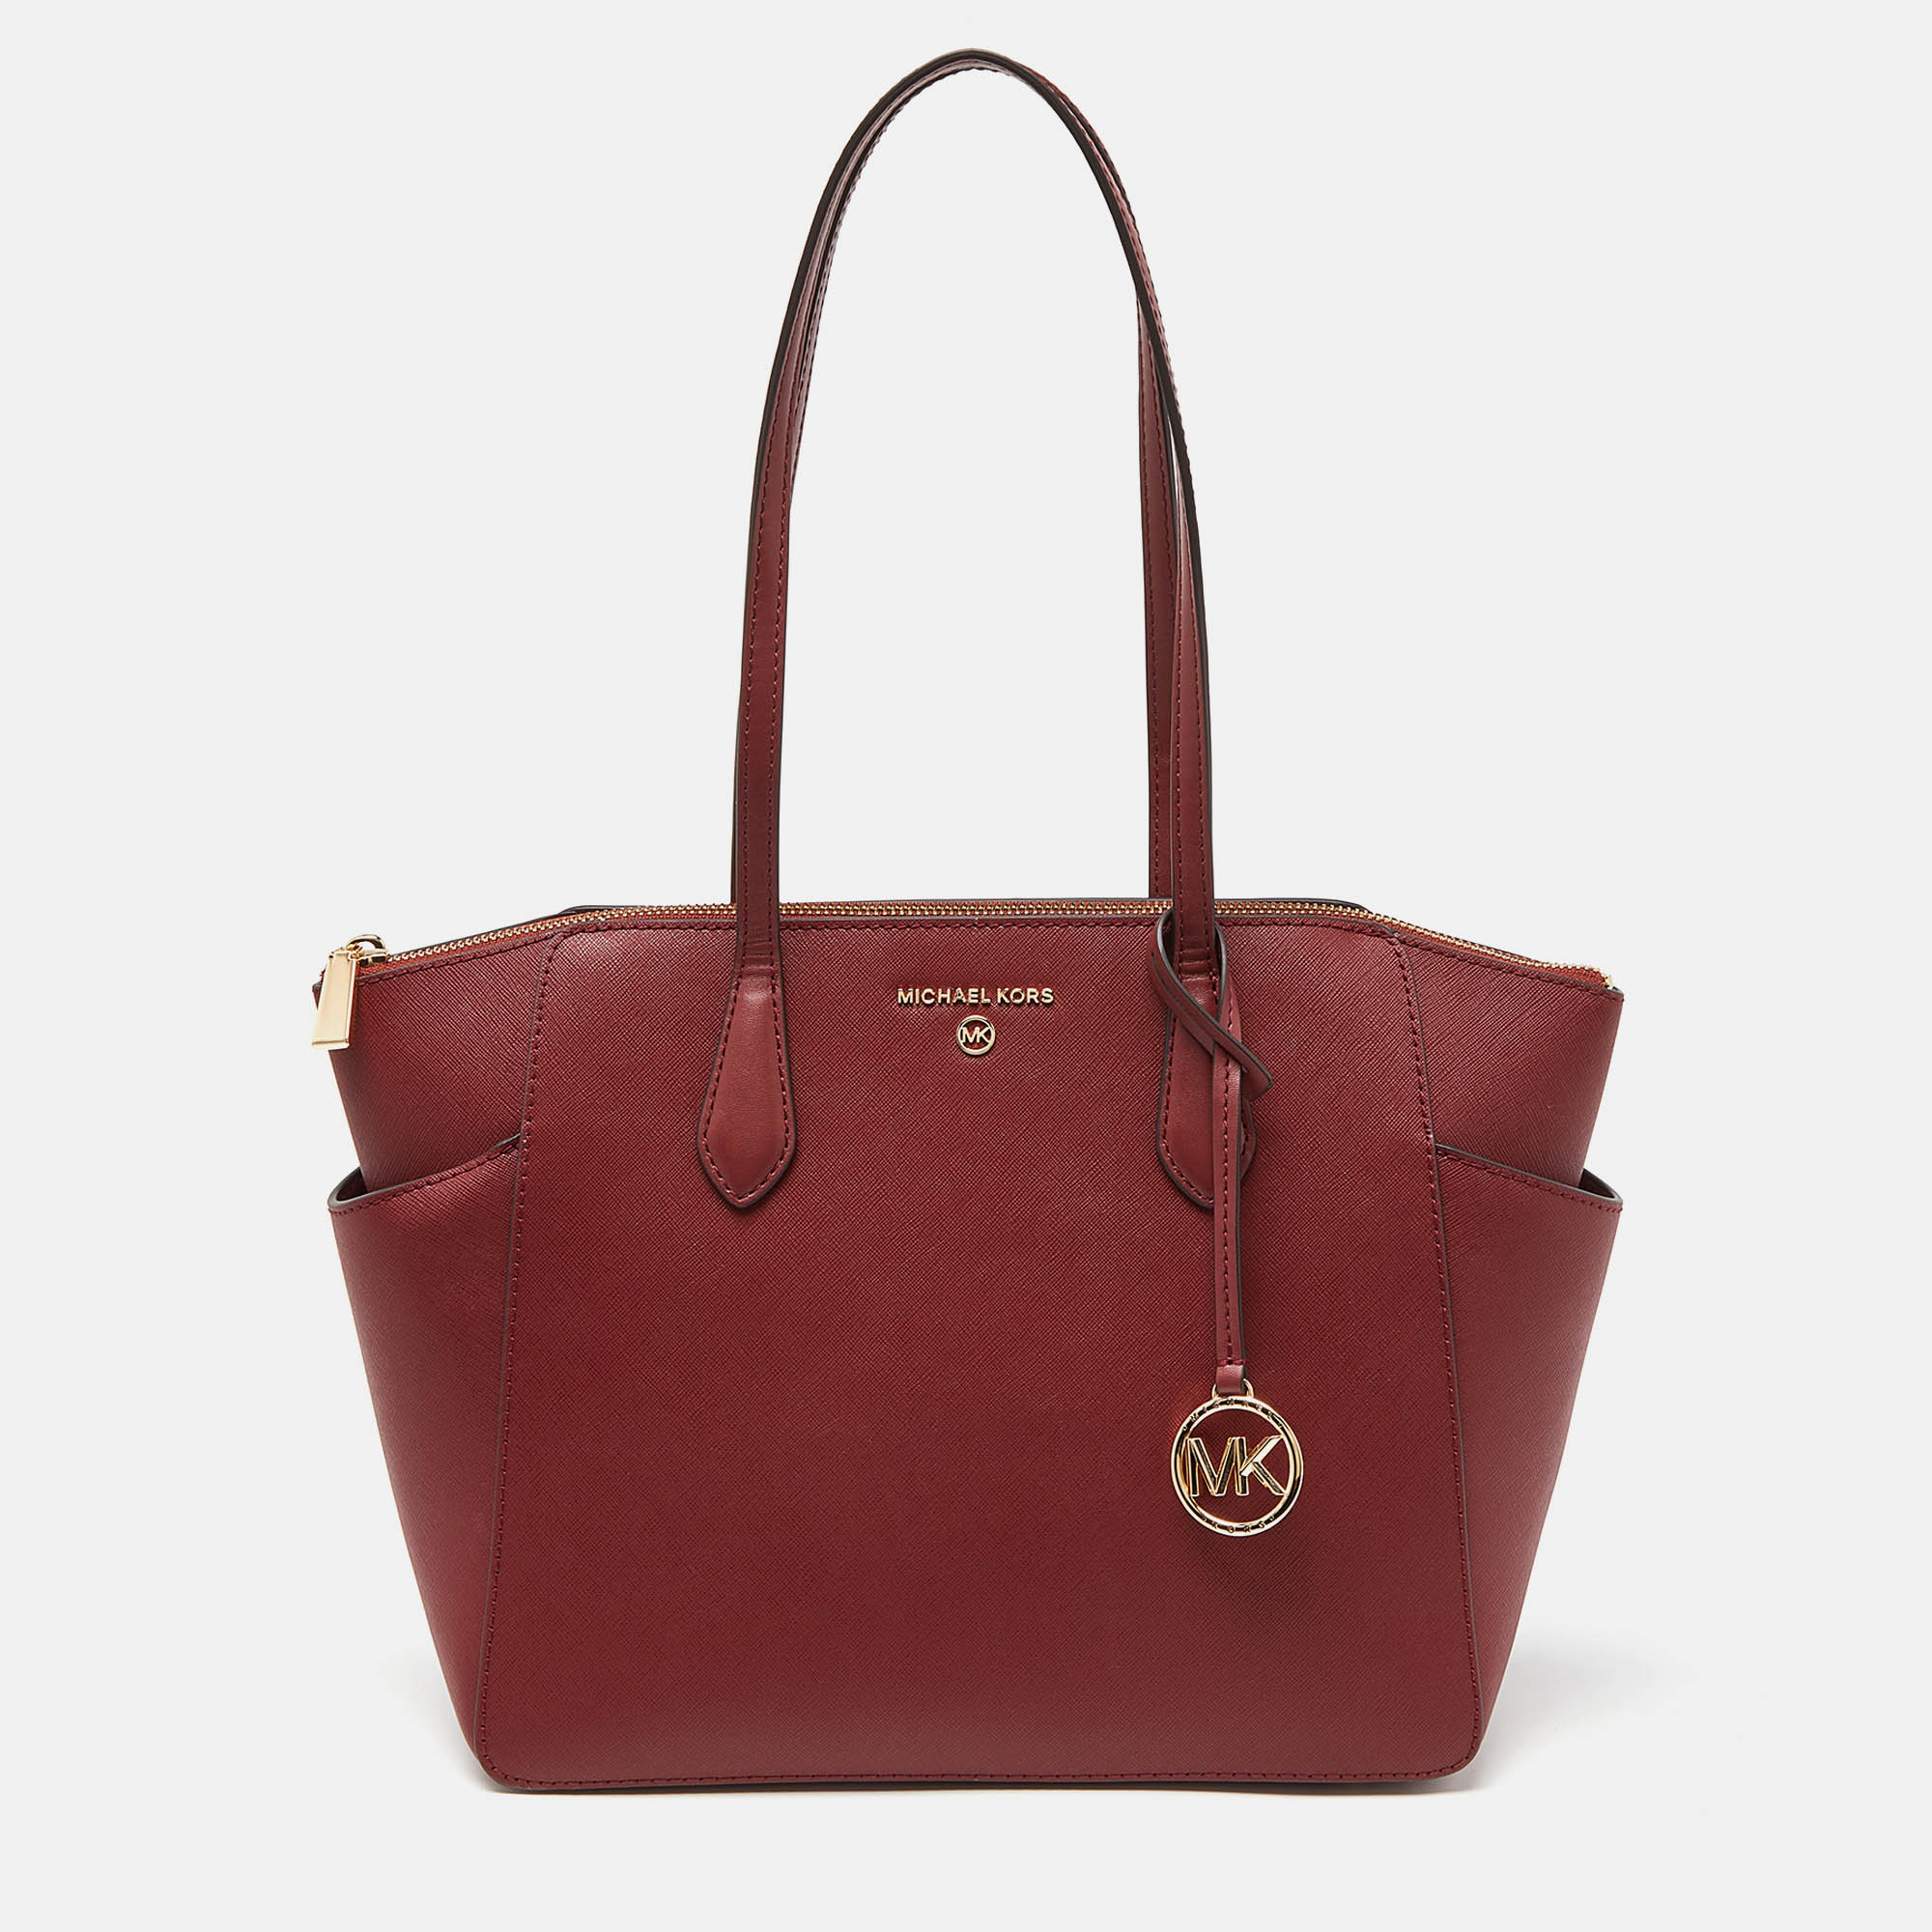 This Michael Kors tote is beautiful in so many ways. From its design to its structure the leather bag exudes charm and high fashion. It flaunts two shoulder handles for you to swing and a spacious interior to hold all your essentials.